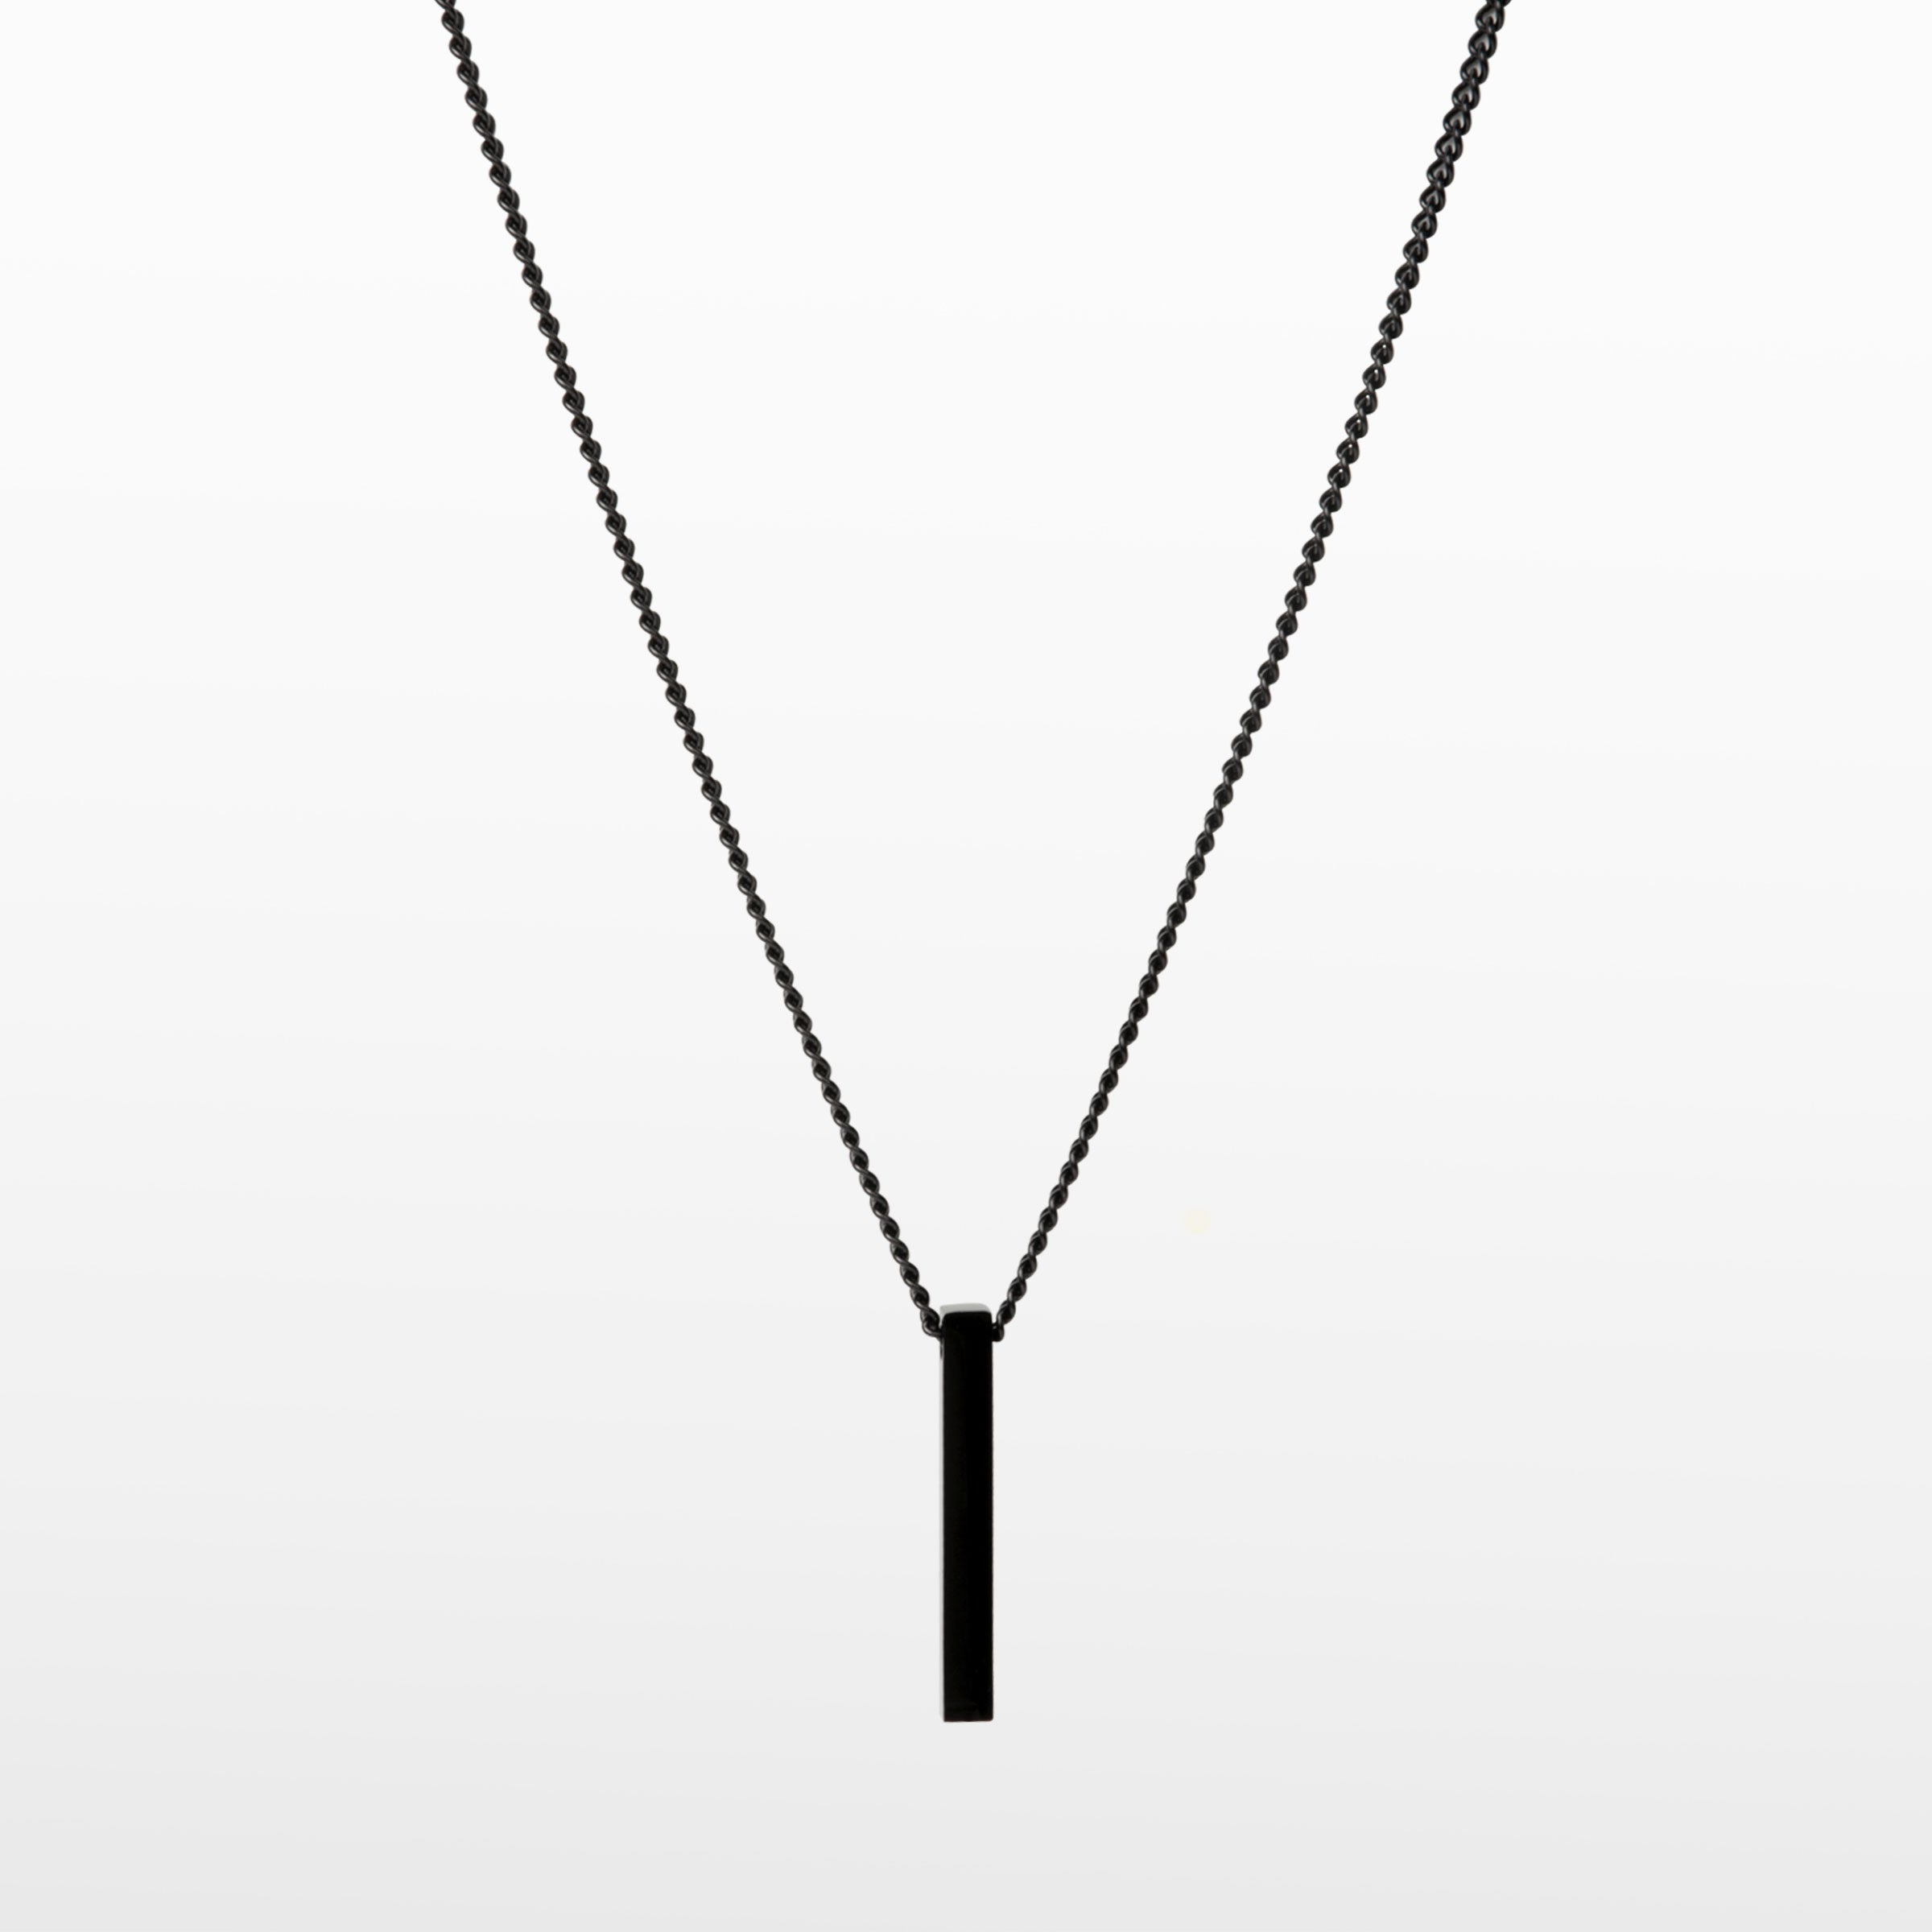 Image of the Bar Pendant Chain is crafted with corrosion-resistant Stainless Steel, making it durable, non-tarnish, and water-resistant.